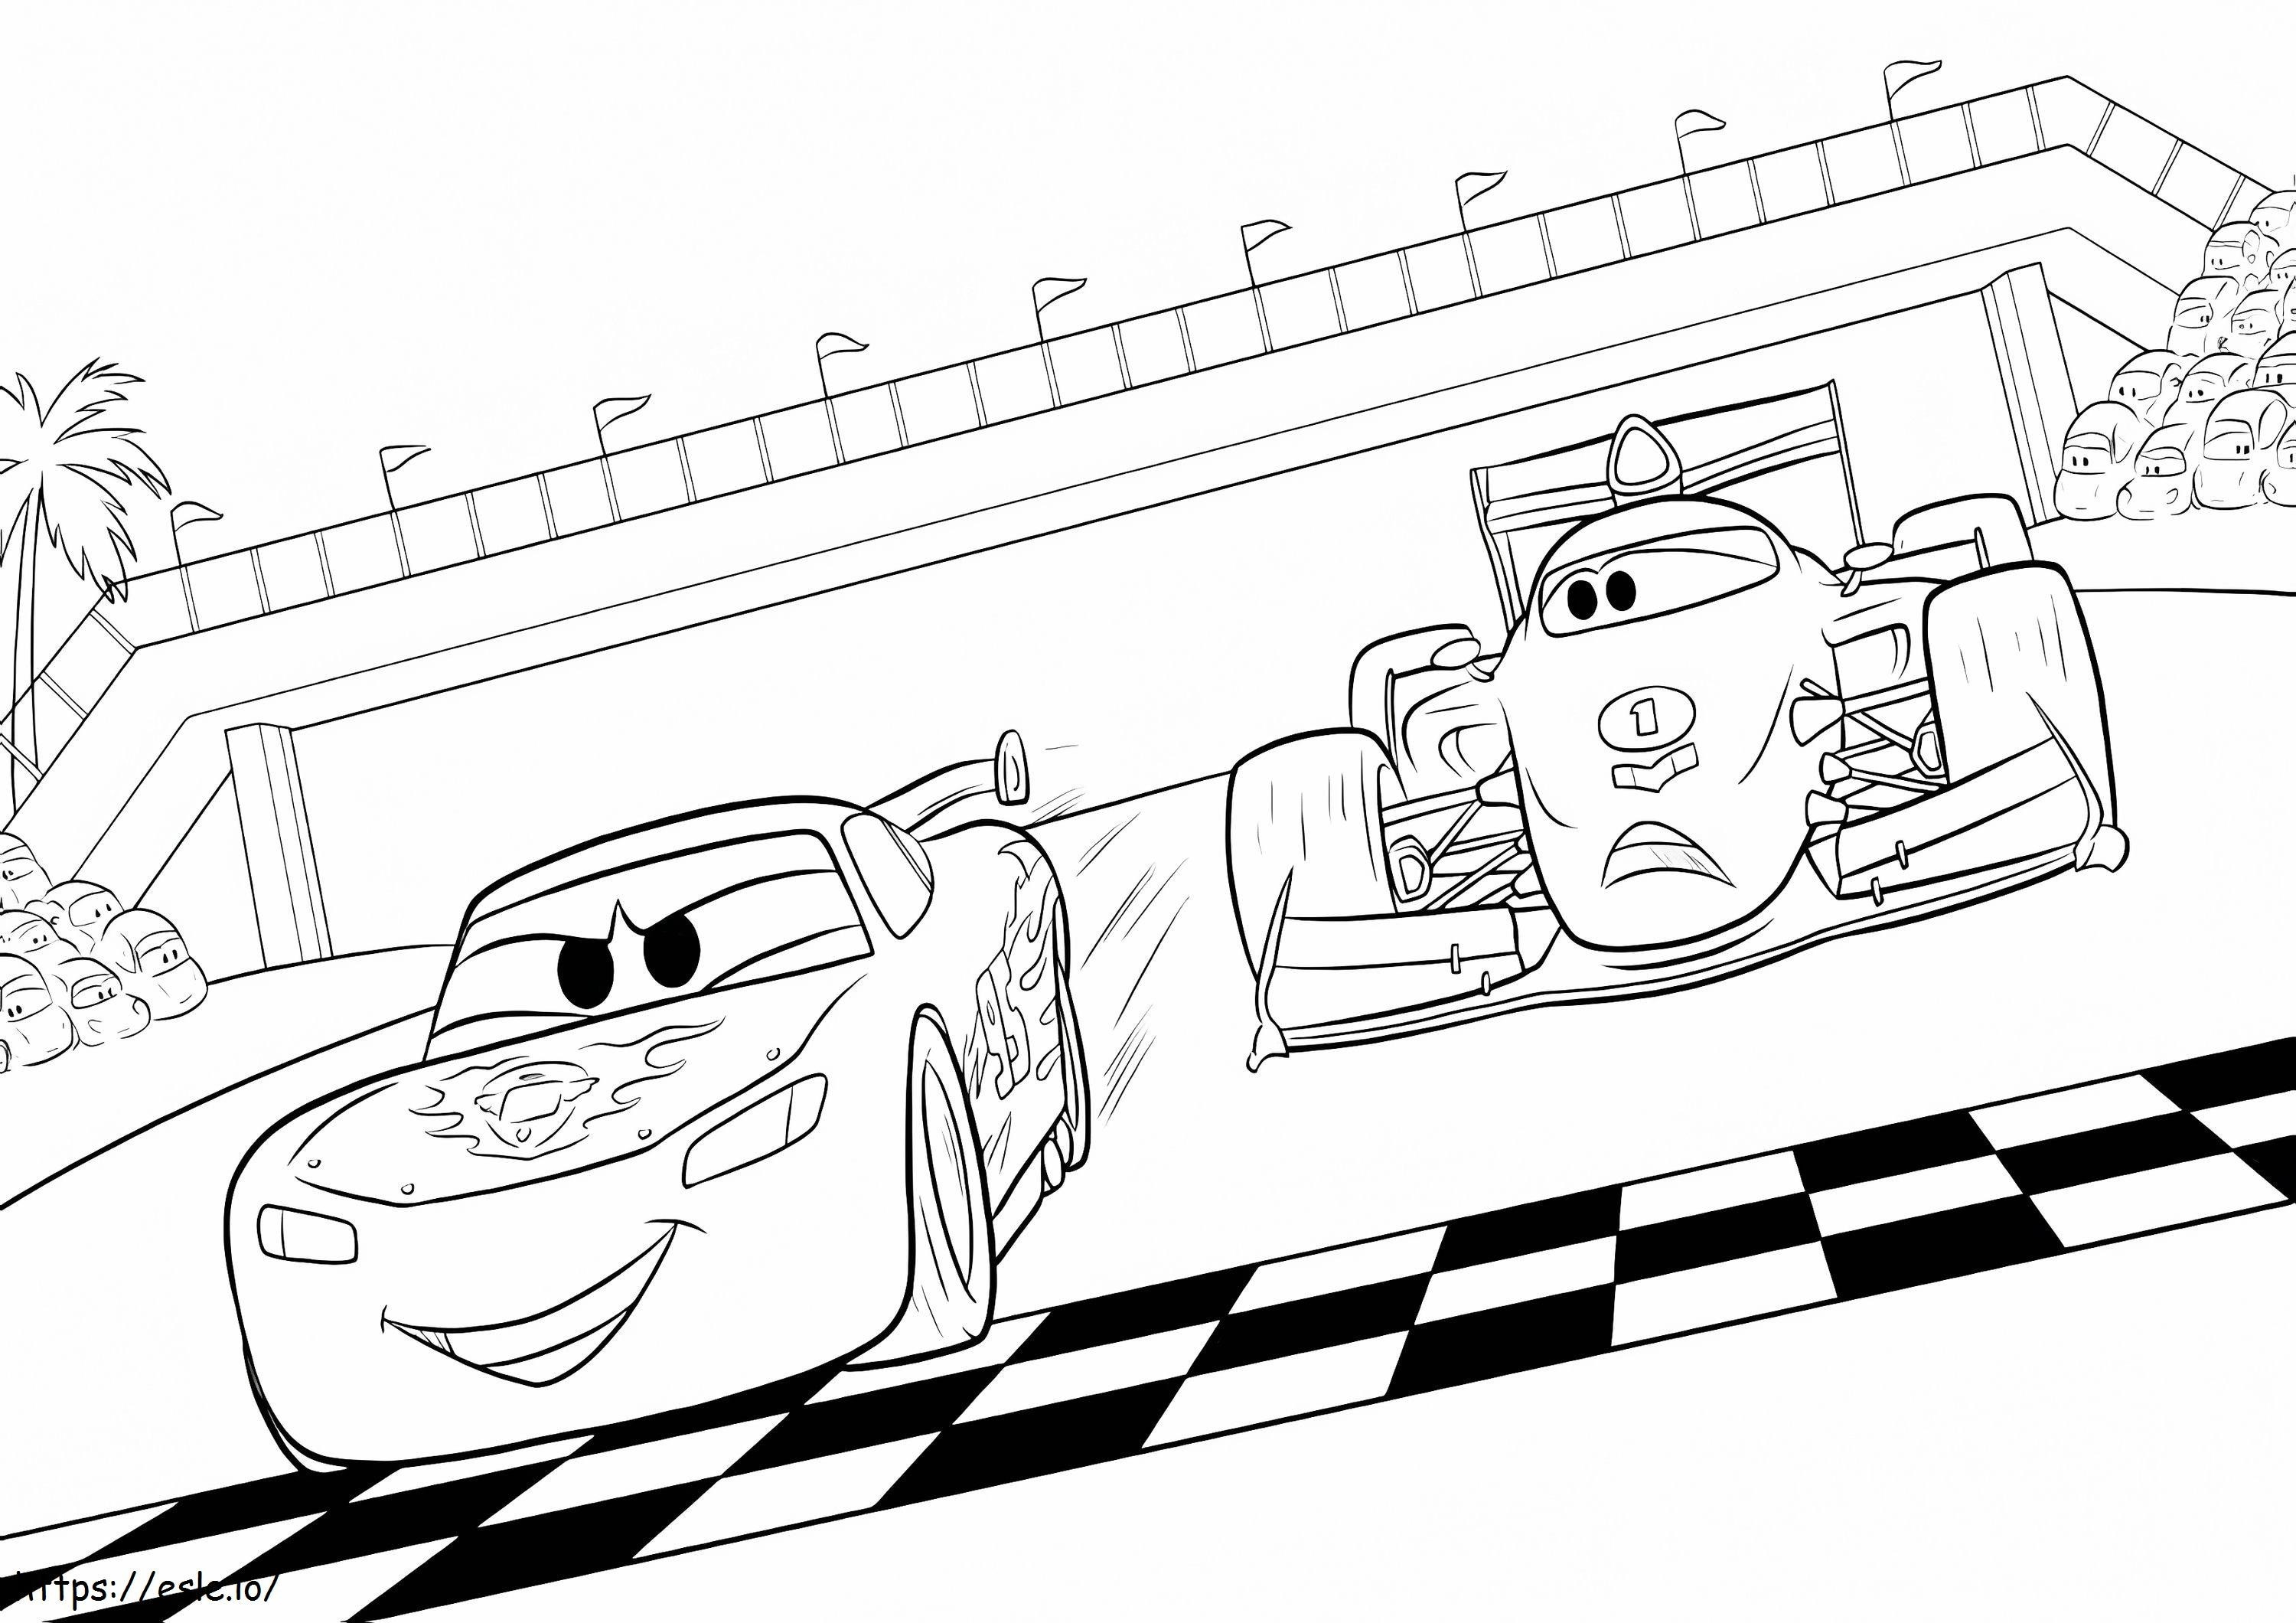 Lightning Mcqueen And Mater Free Printable Lightning For Kids Best Lightning To Print And Color Lightning Lightning Mcqueen And Tow Mater coloring page